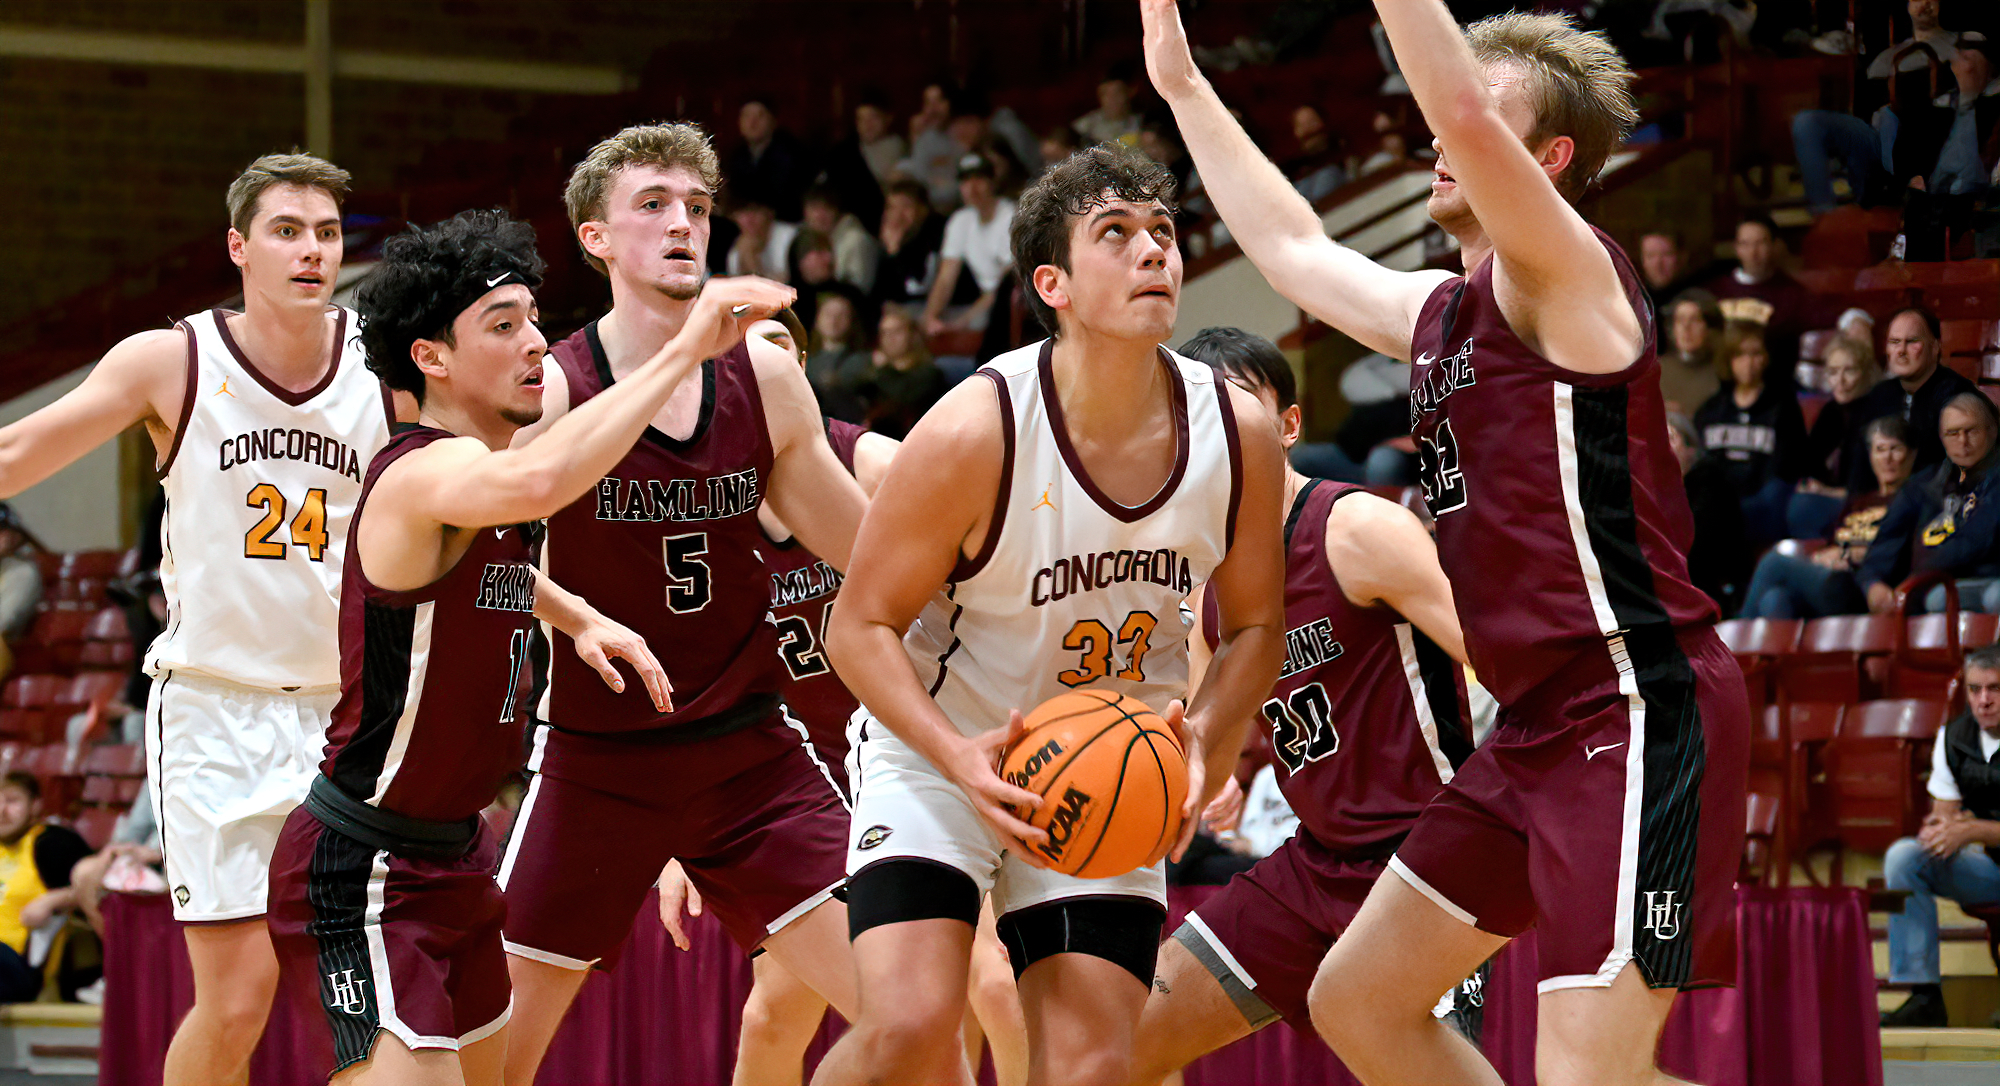 Jacob Cook eyes the basket as he is surrounded by three Hamline defenders in the Cobbers' game with the Pipers.